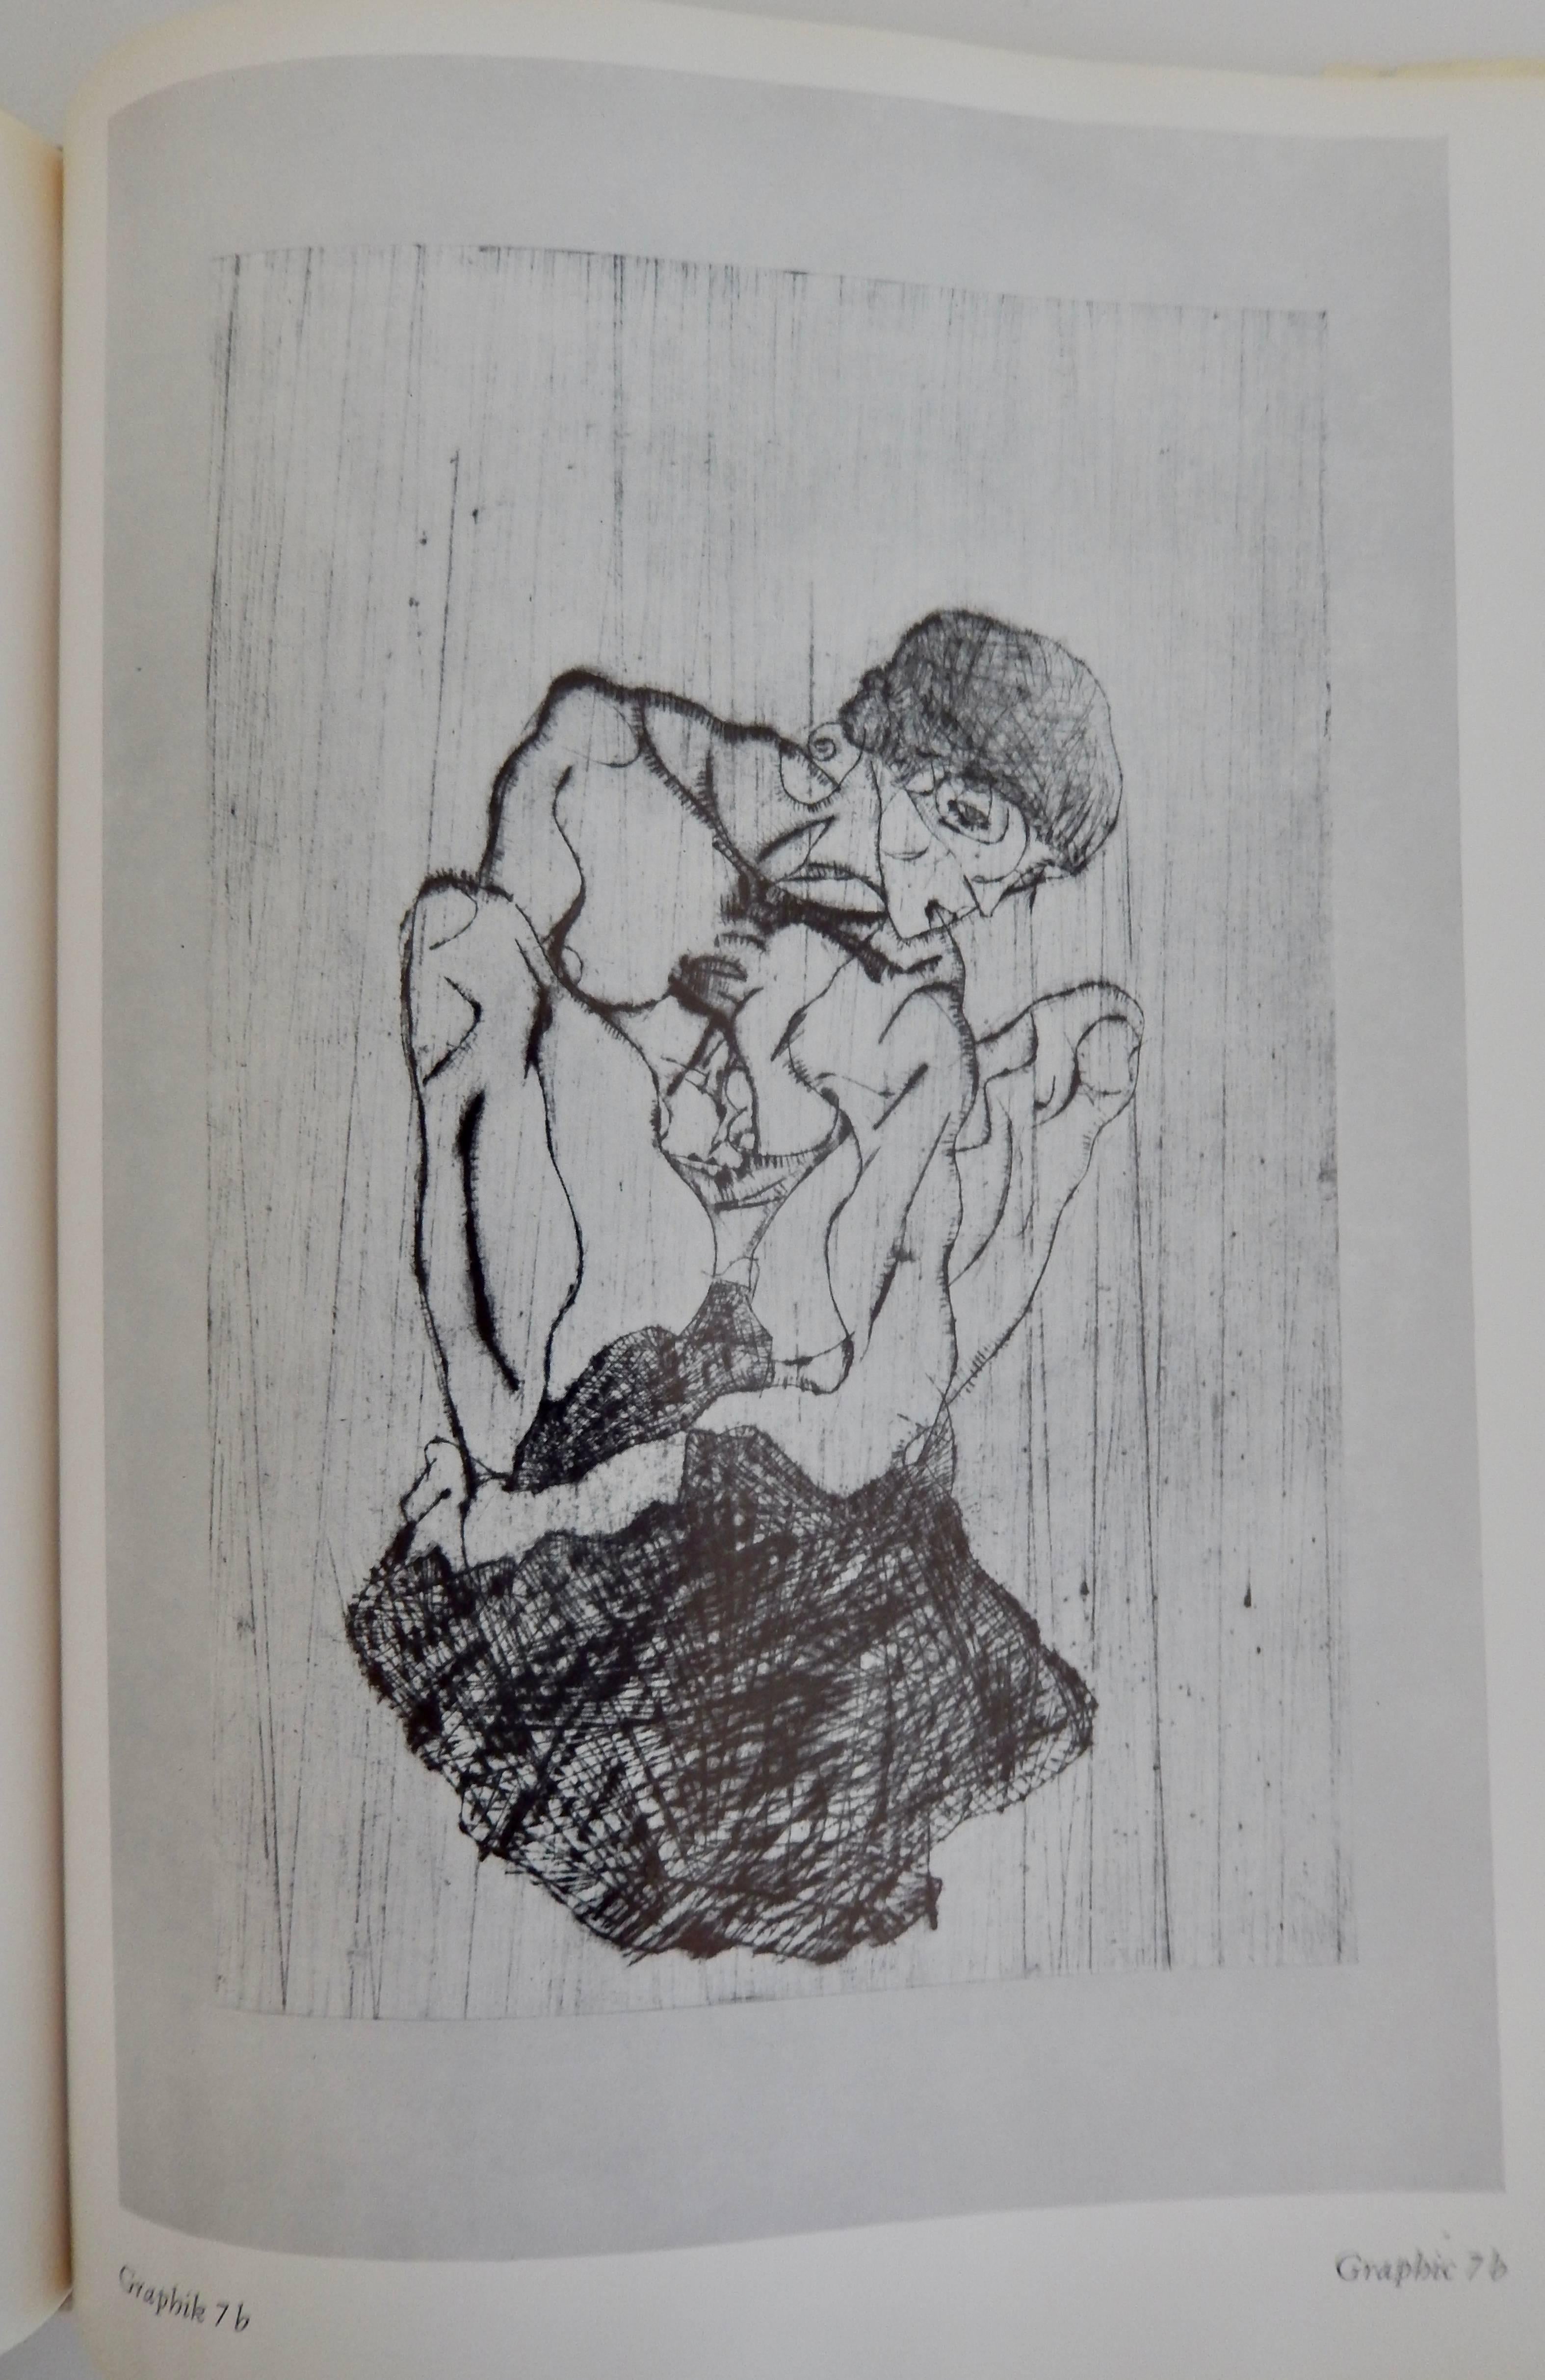 American Egon Schiele, The Graphic Work, Reference Book by Otto Kallir, 1970